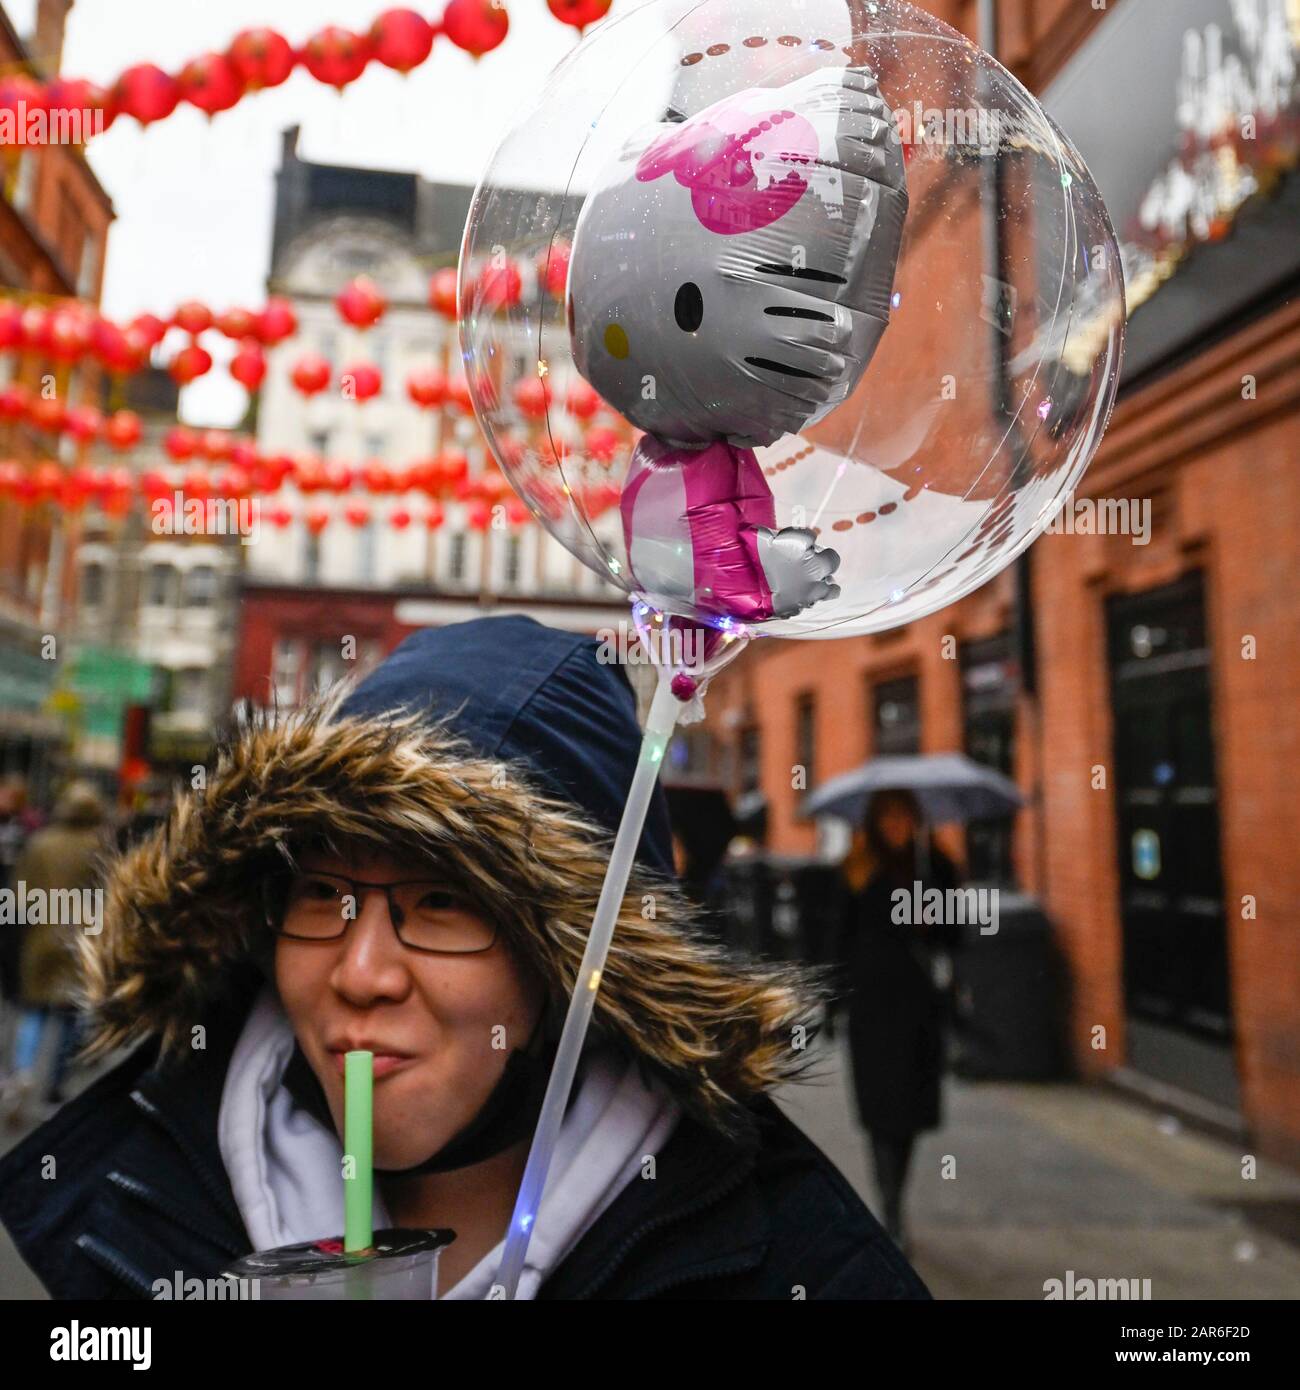 Chinese Employee Shows Bra Featuring Hello Kitty Pattern Store Hello –  Stock Editorial Photo © ChinaImages #241936292